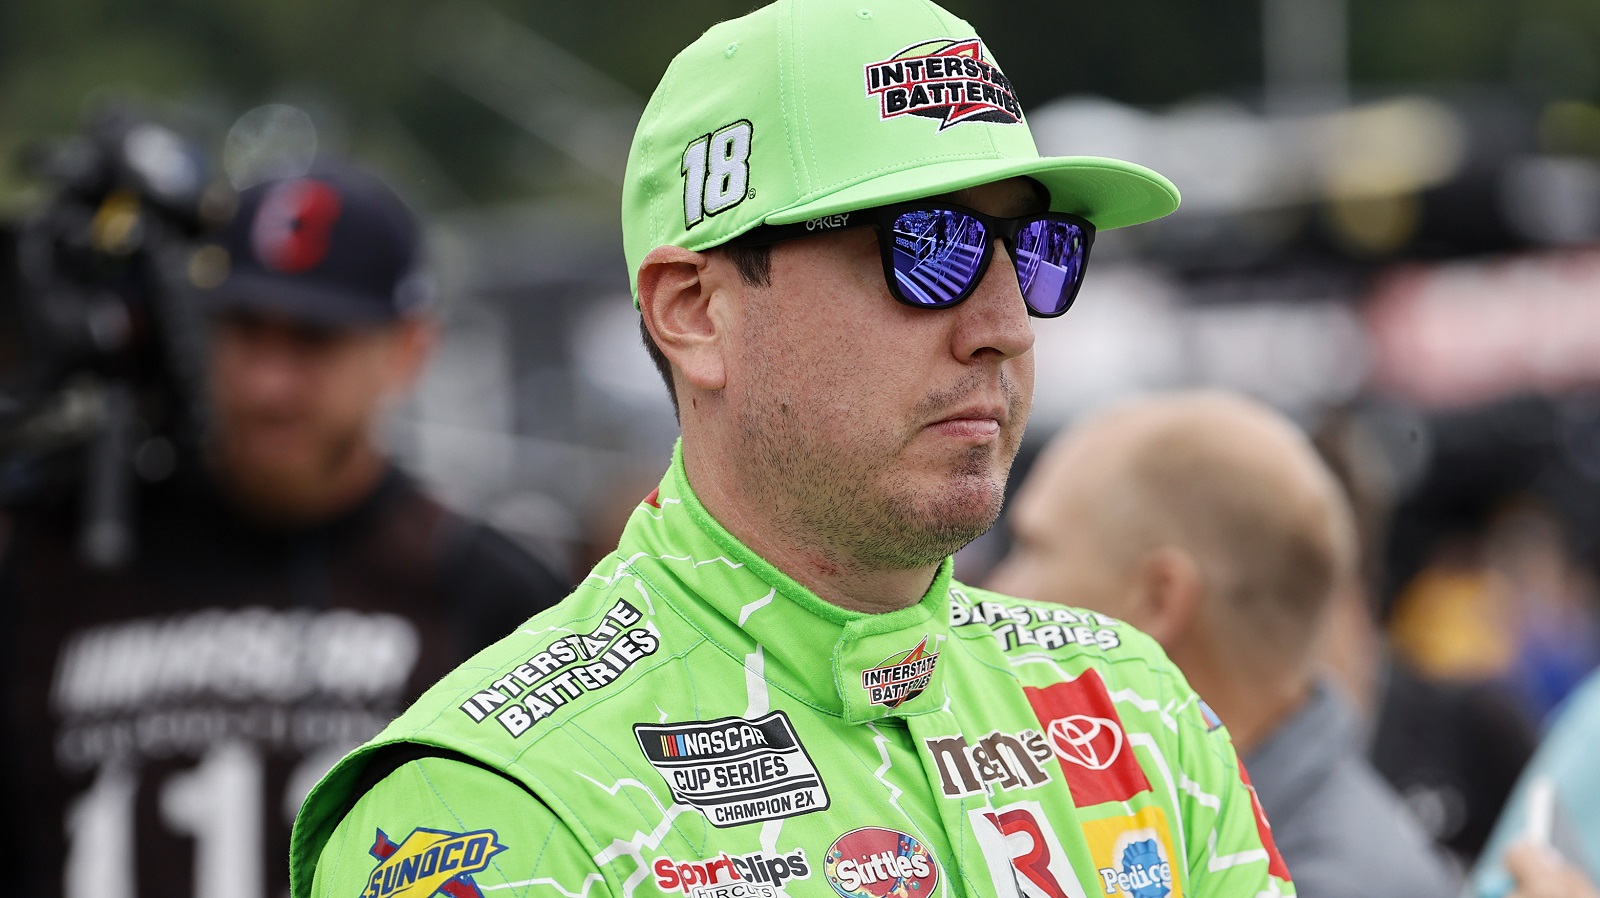 Kyle Busch, driver of the No. 18 Interstate Batteries Toyota Camry, before the Foxwoods Resort Casino 301 on July 18, 2021.